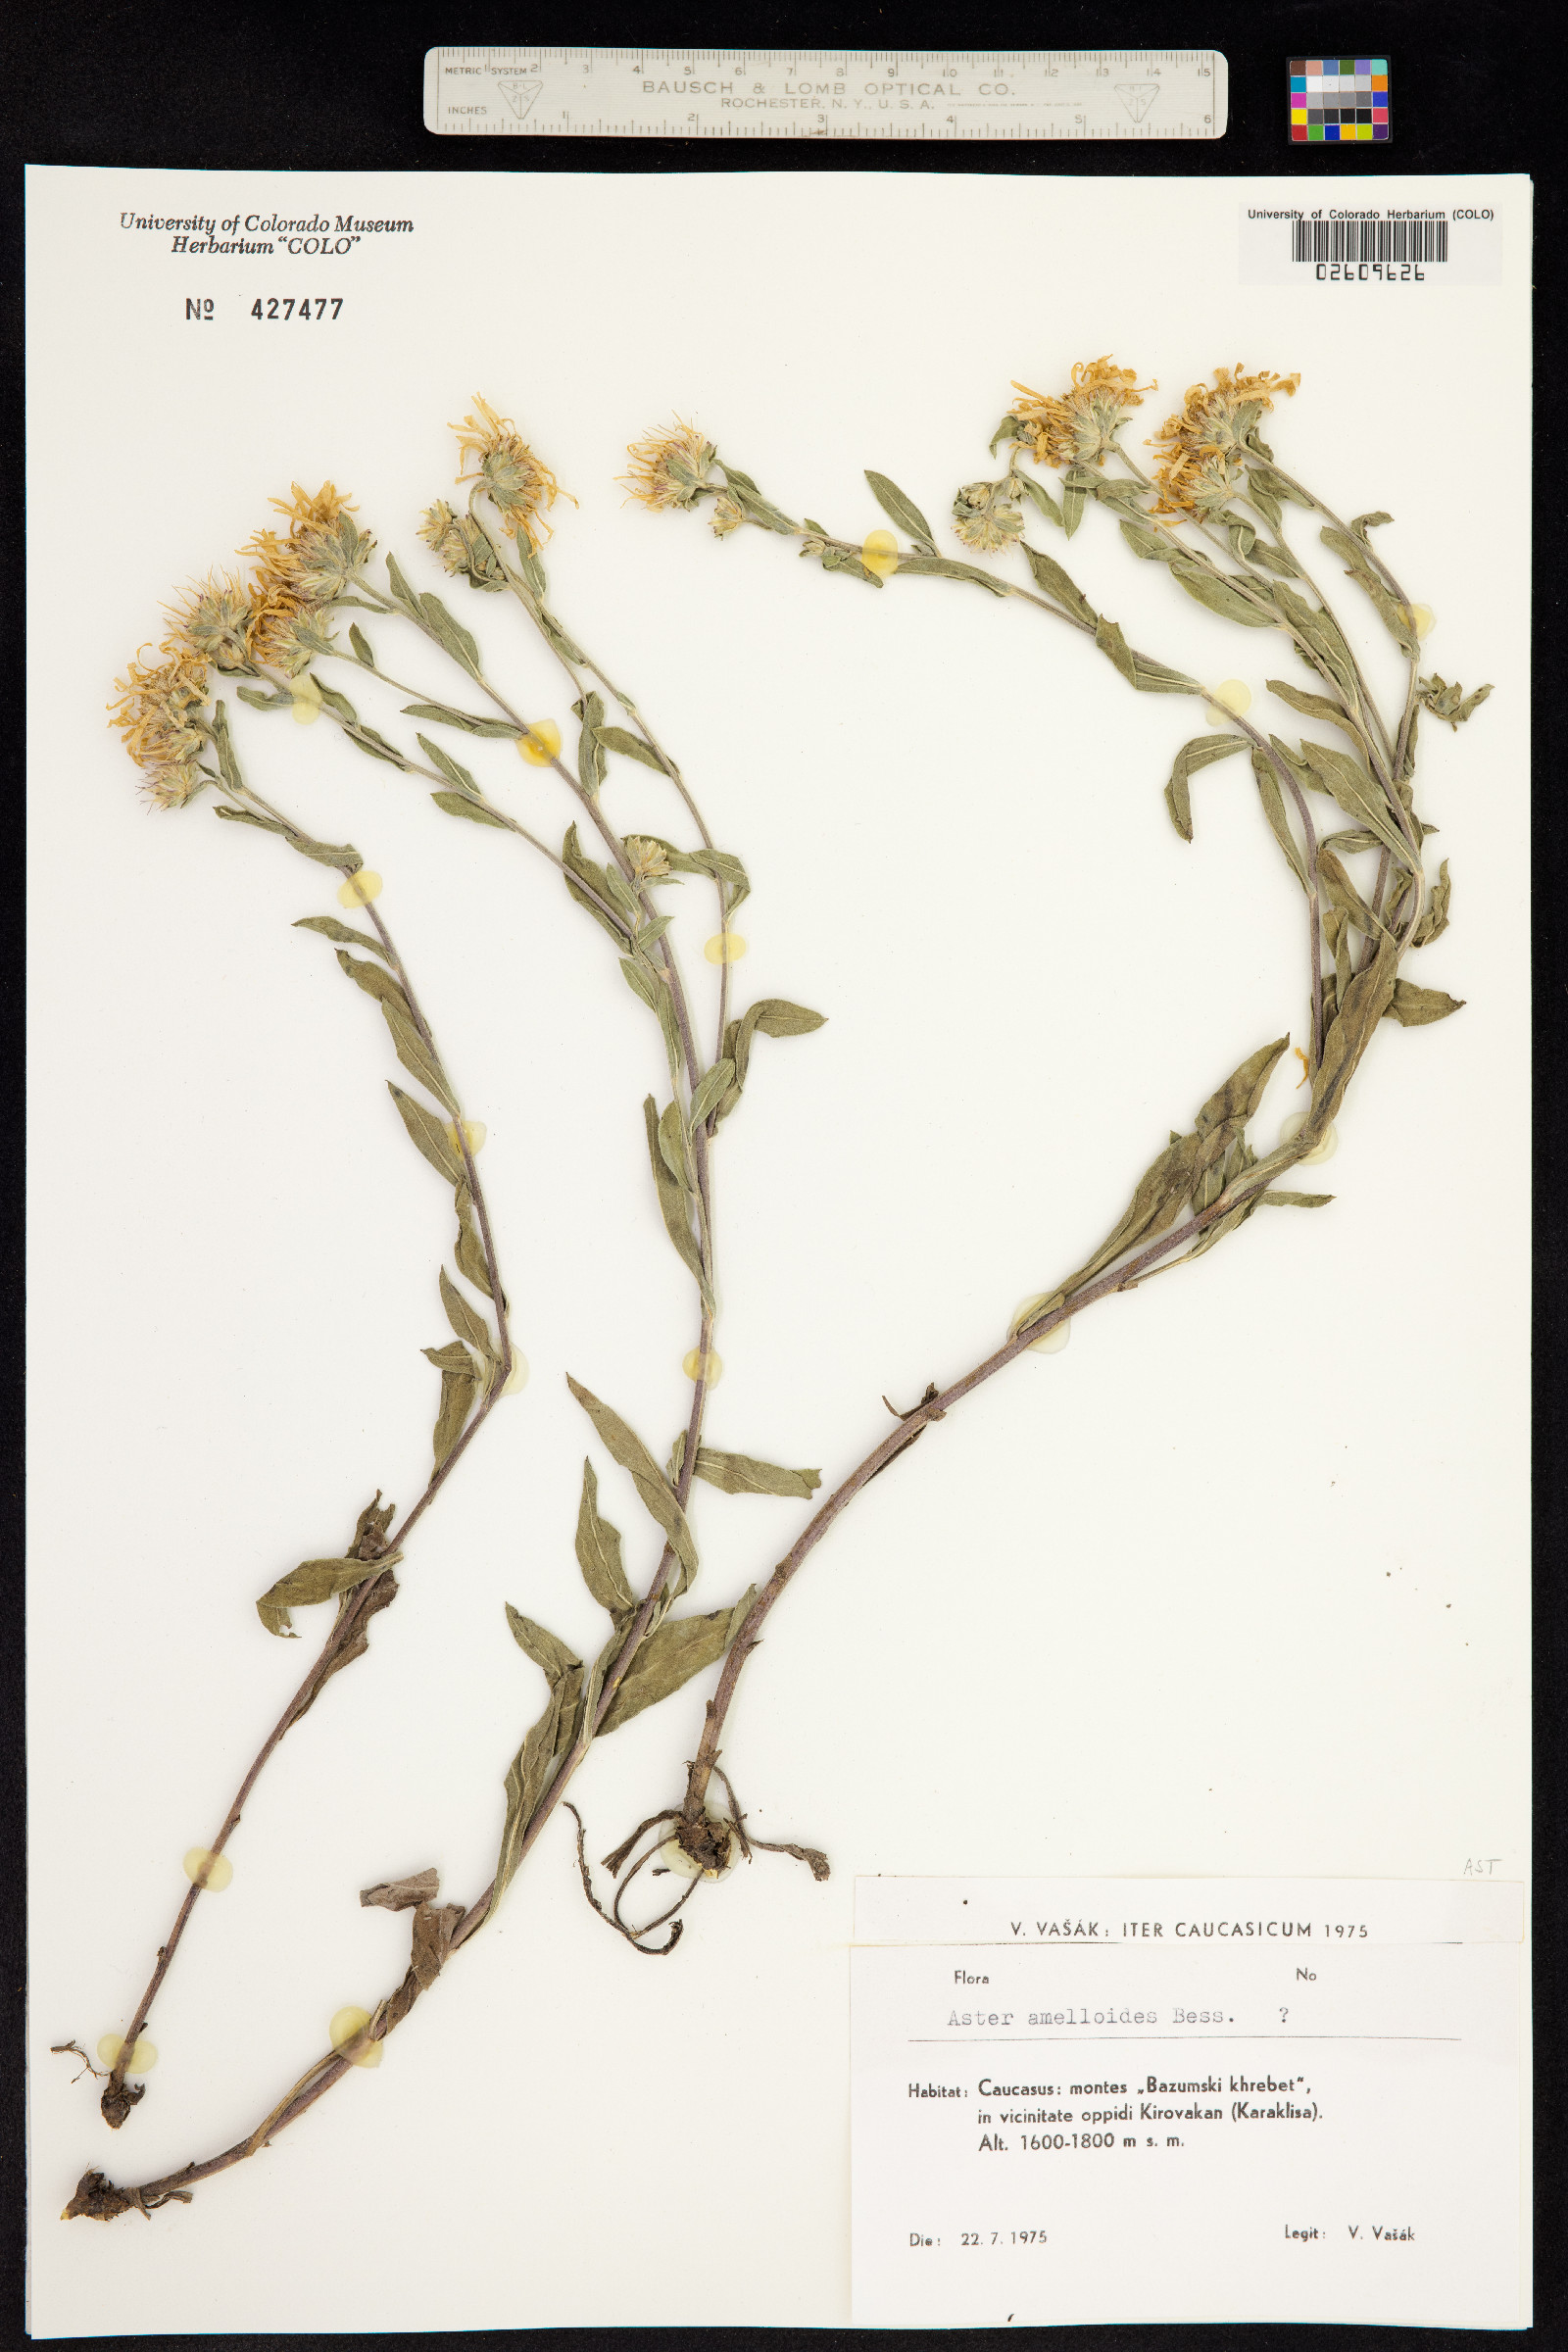 Aster amelloides image